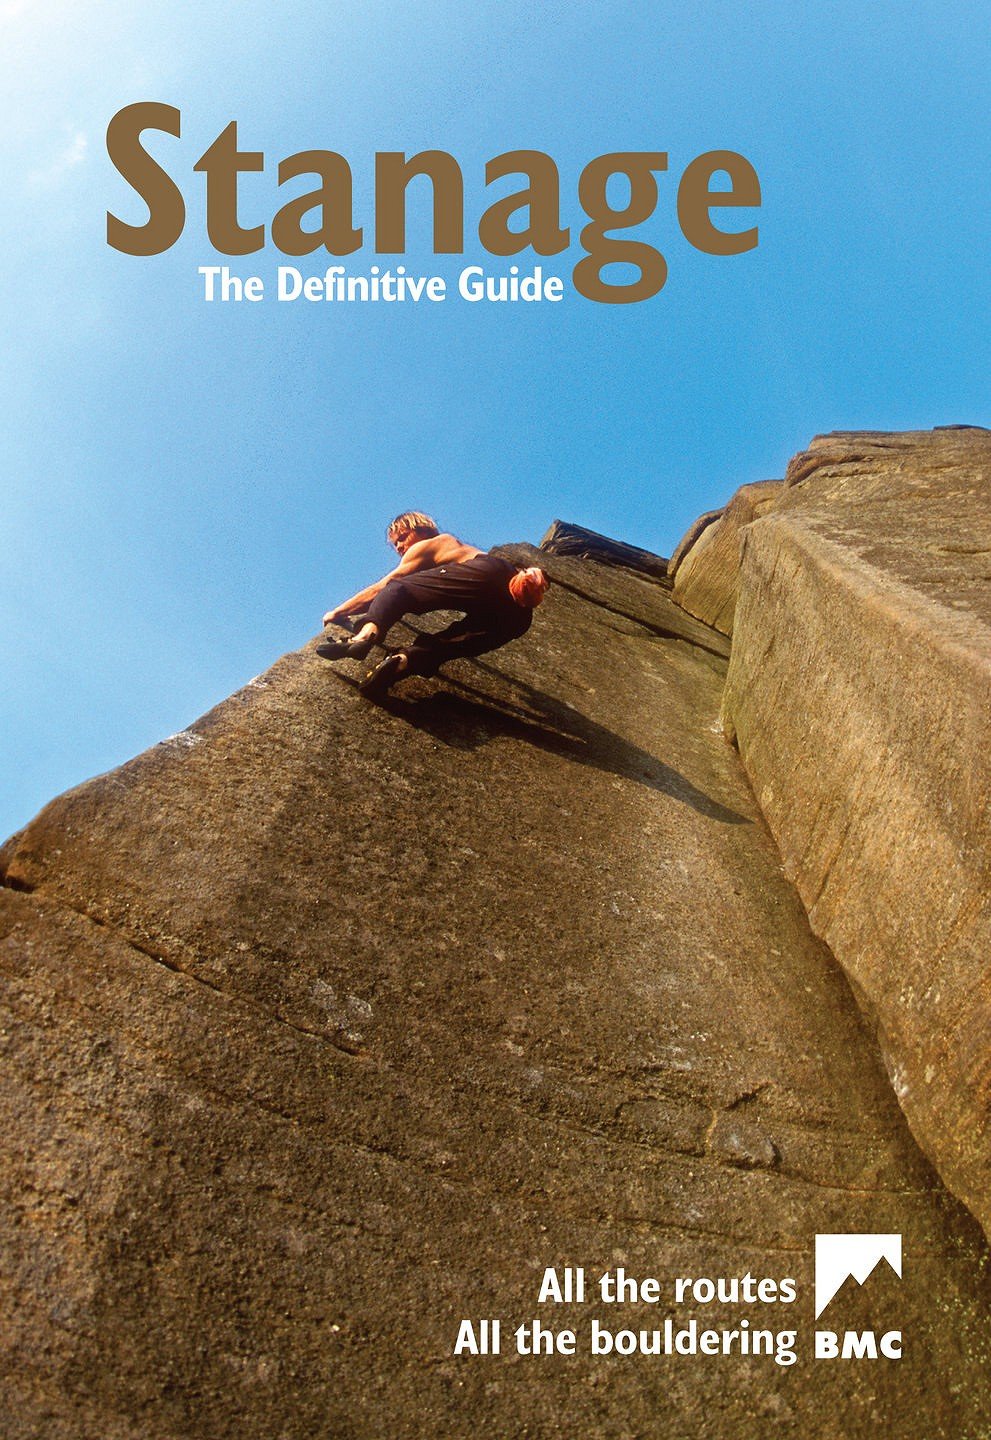 Stanage - the Definitive Guide cover photo  © Niall Grimes